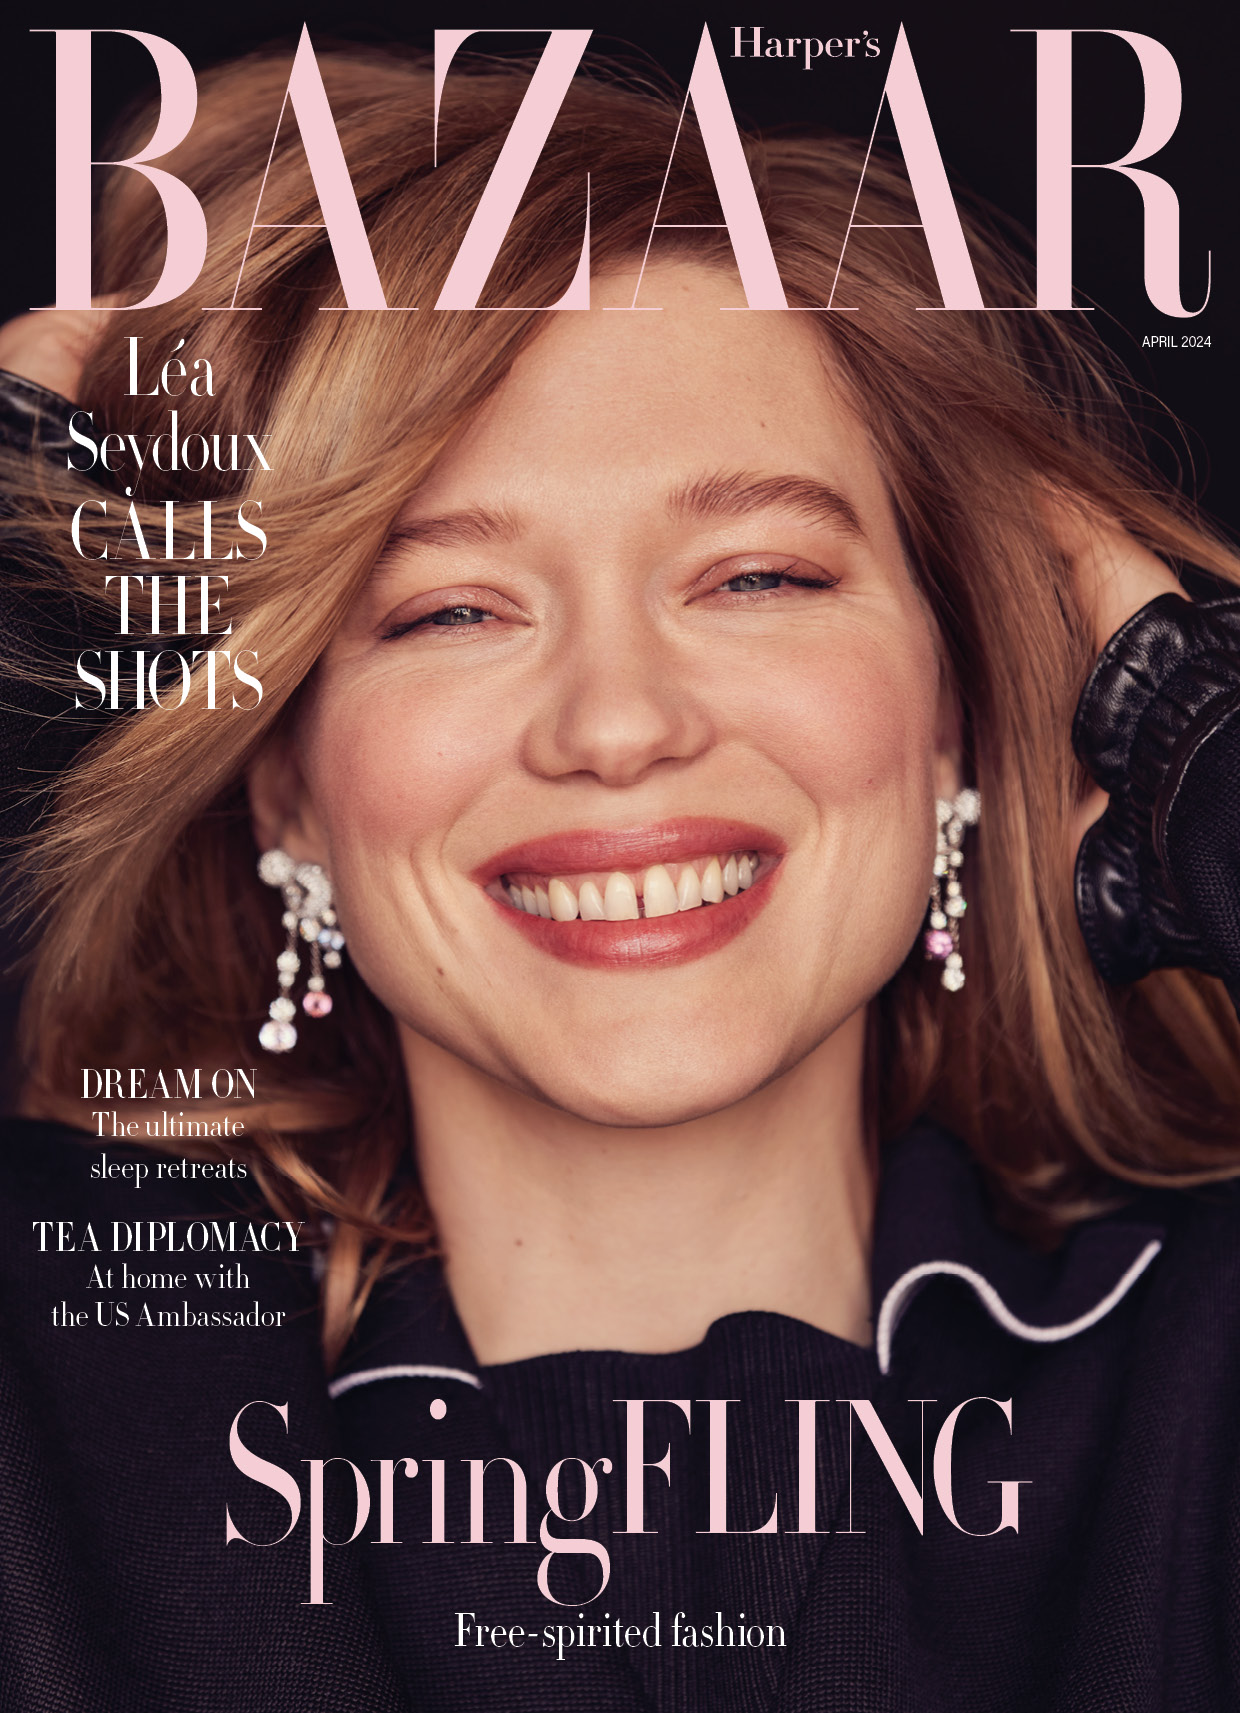 The actress speaks to Bazaar about pushing herself out of her comfort zone